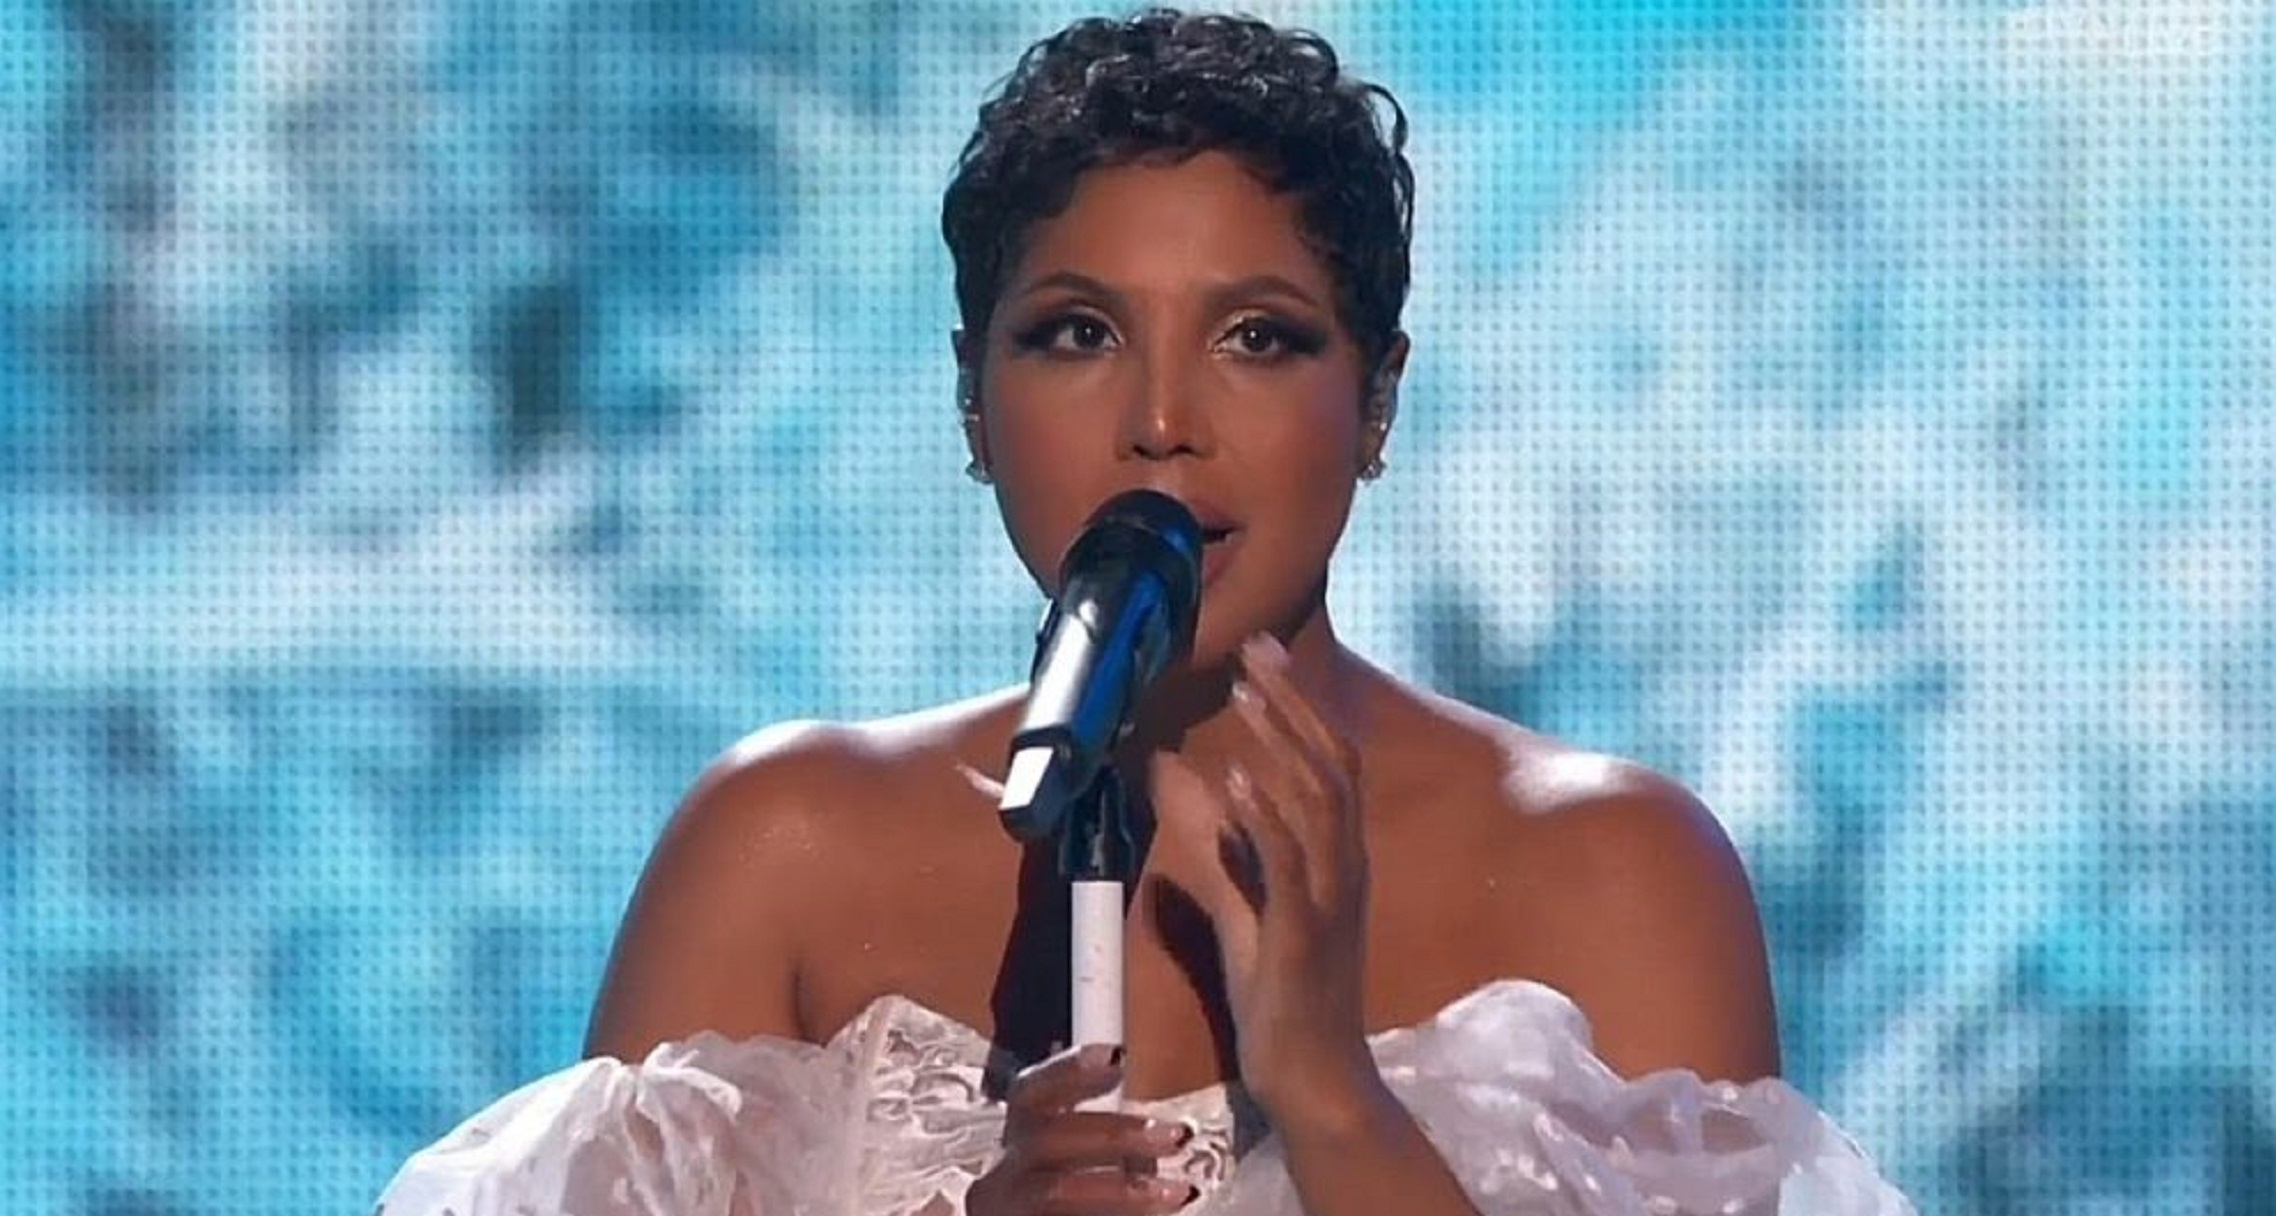 Toni Braxton Earns Record Of Most #1’s on Adult R&B Airplay Chart Tying With Alicia Keys